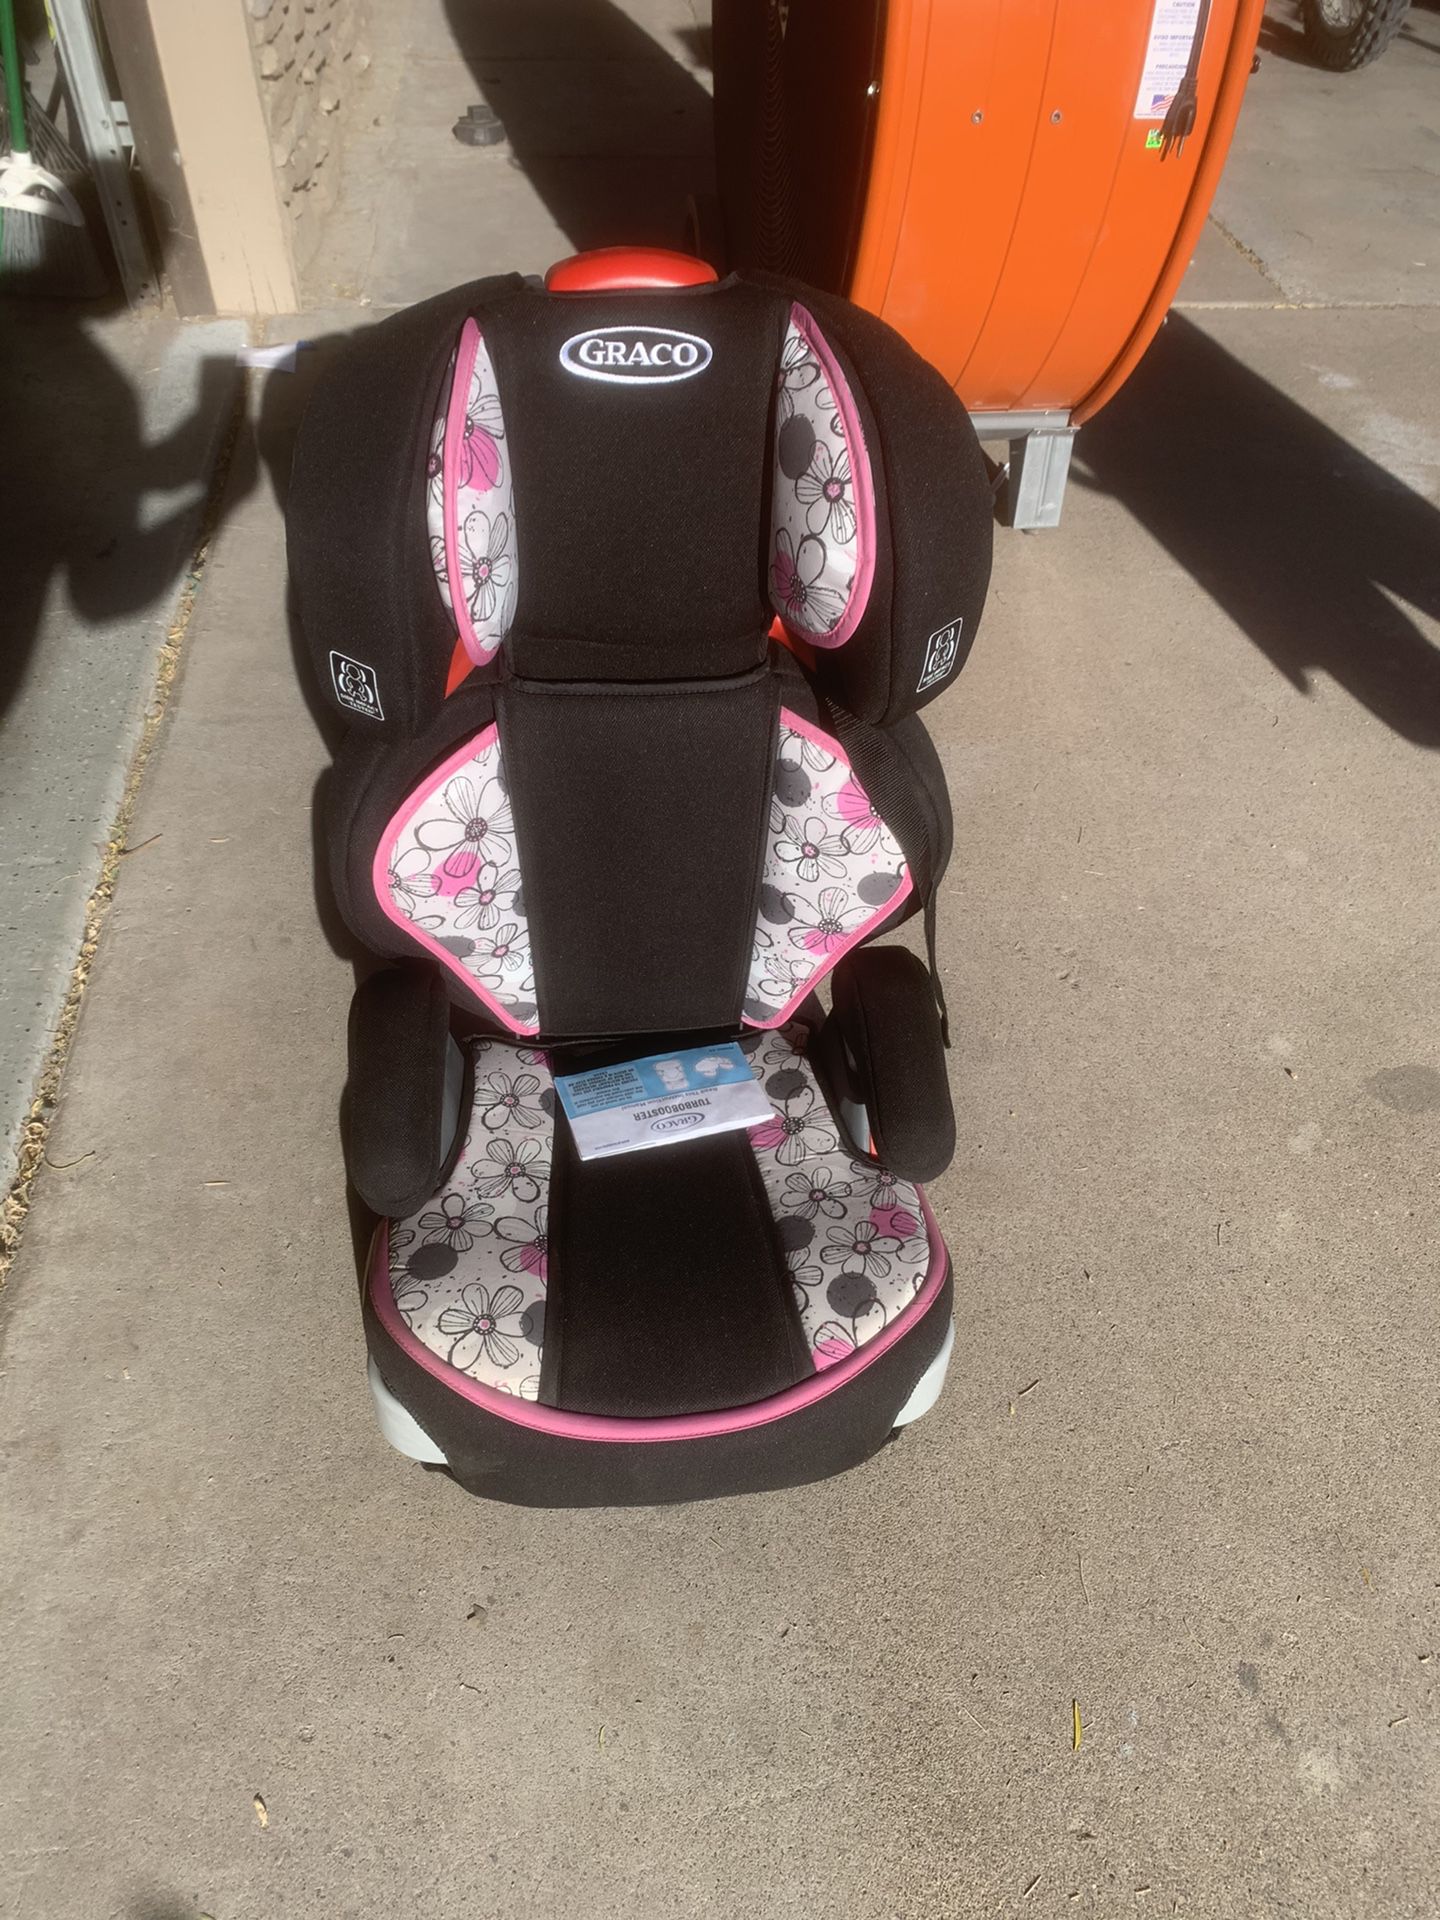 For a new booster seat